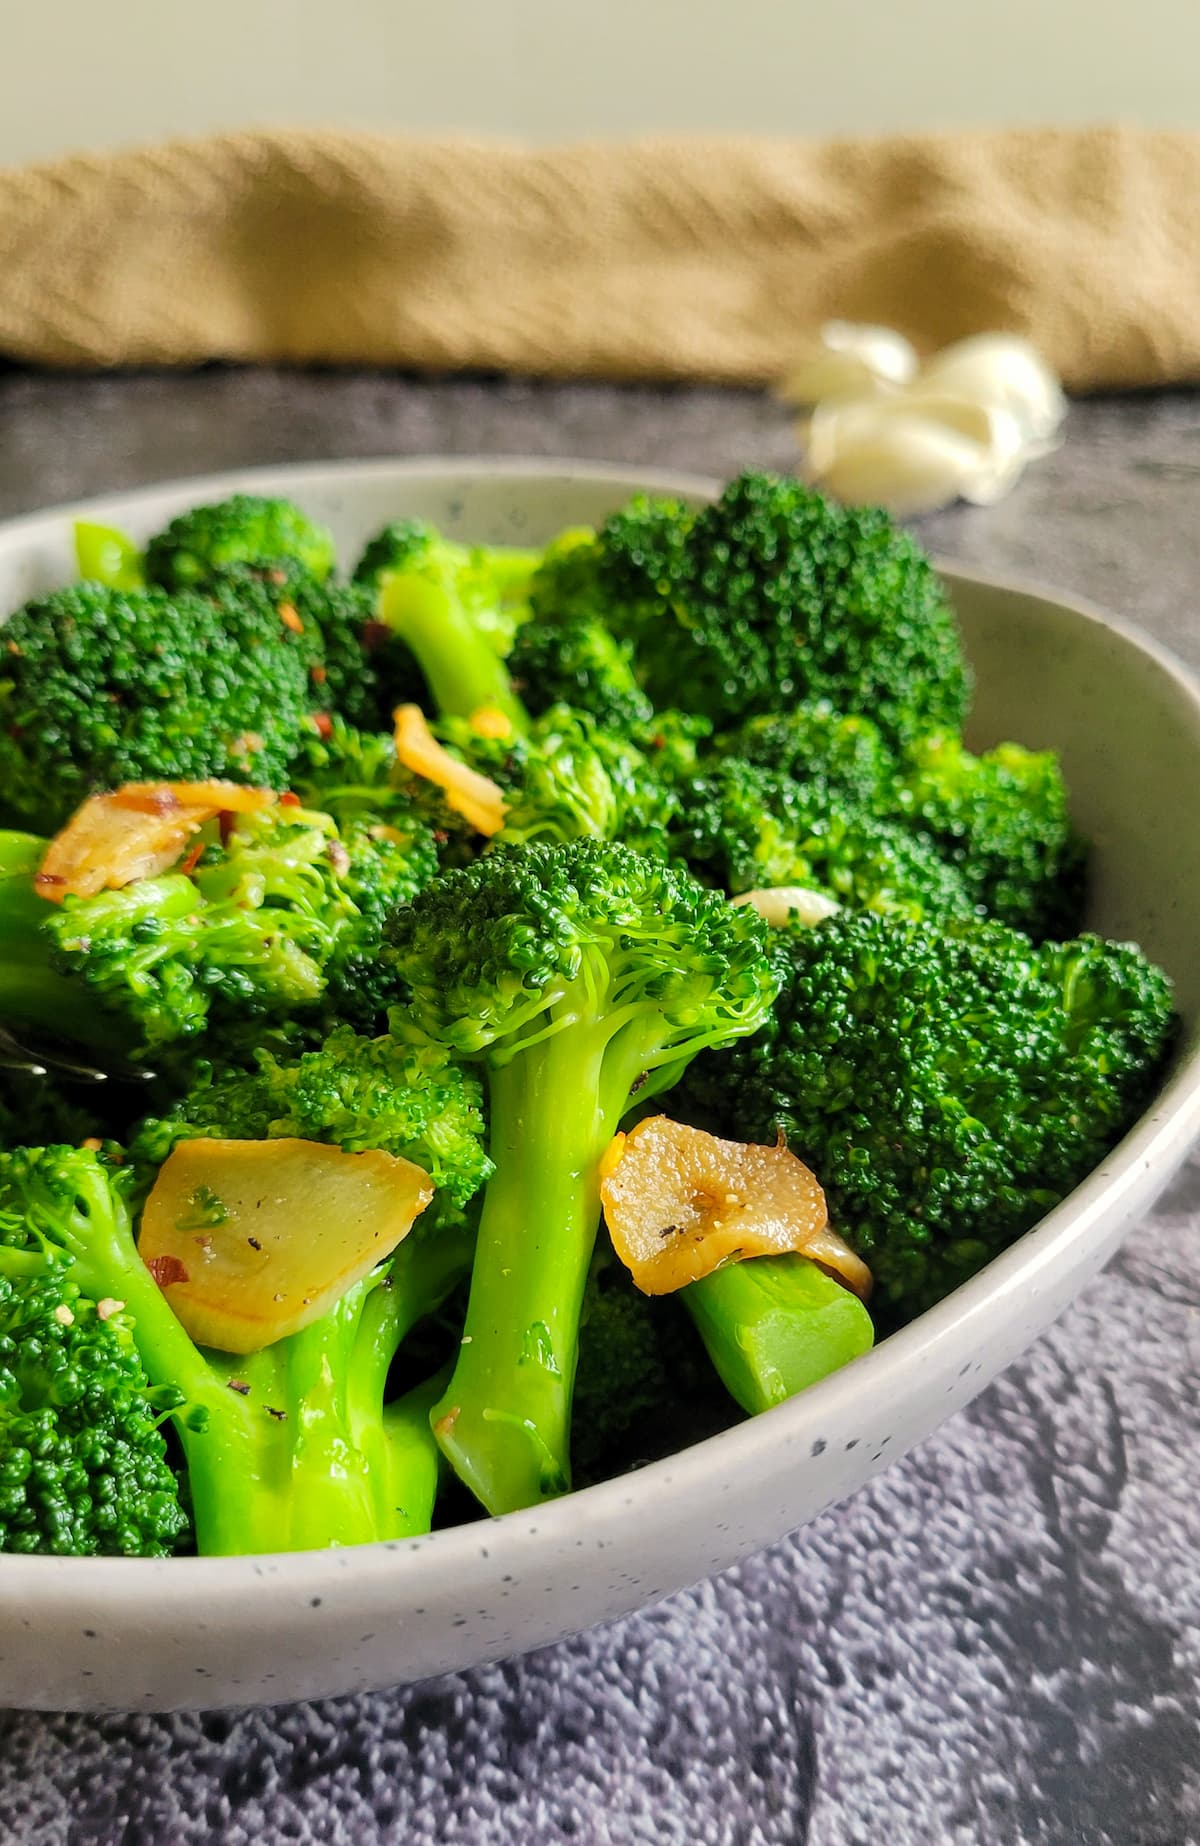 sliced crispy garlic and cooked broccoli in a bowl